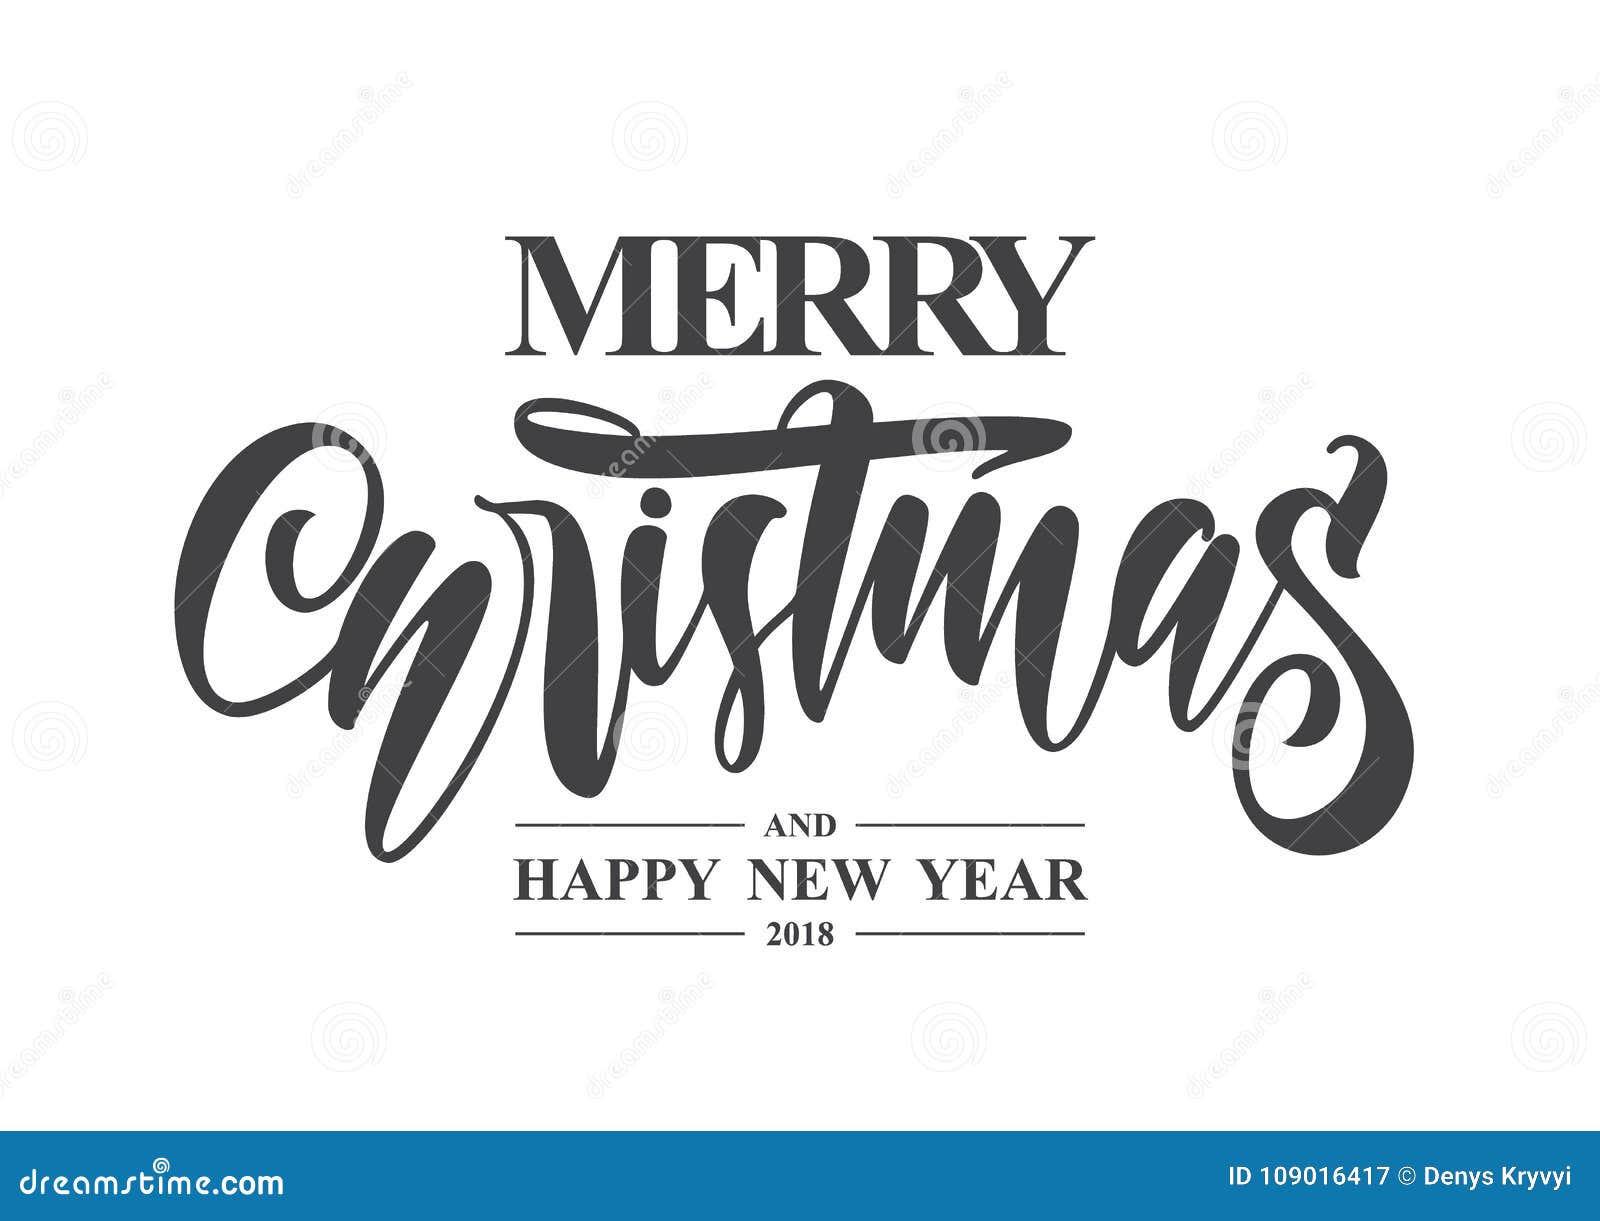 hand type lettering of merry christmas and happy new year on white background